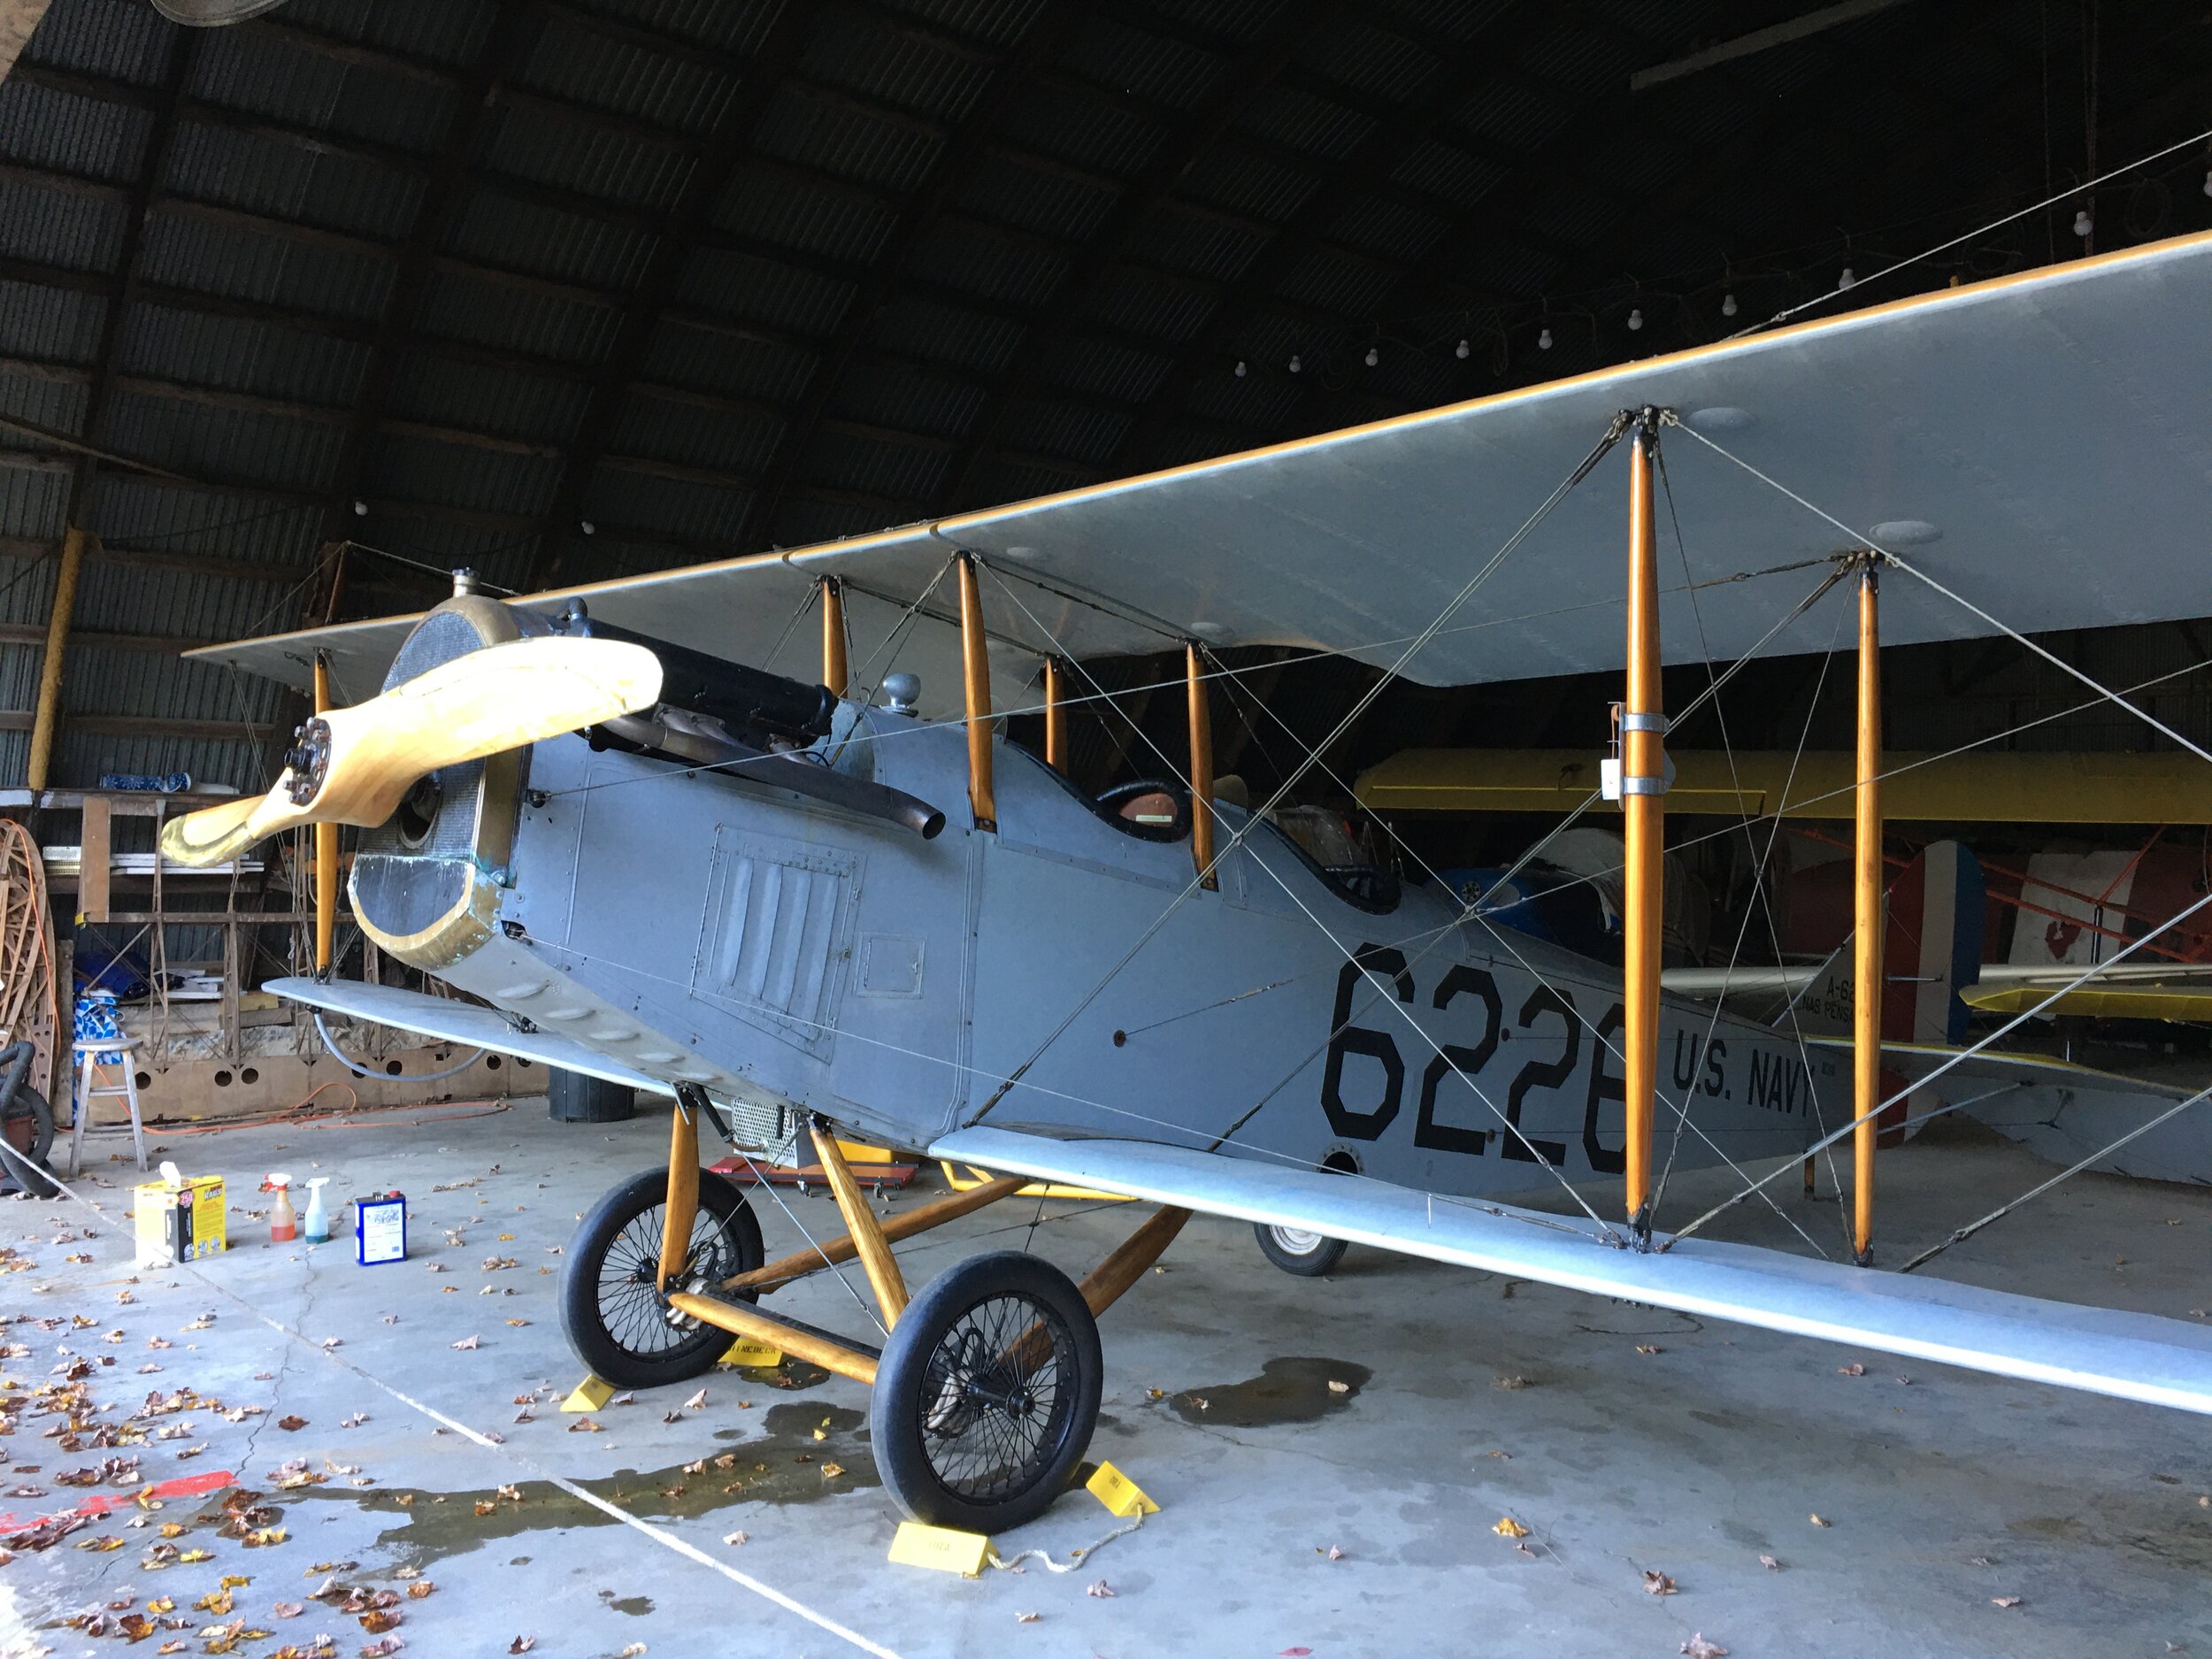  The most famous American airplane of WWI was the Curtiss JN-4 “Jenny”.  Most of the American pilots were trained on these versatile machines. A great many were sold cheaply as surplus after the war. 